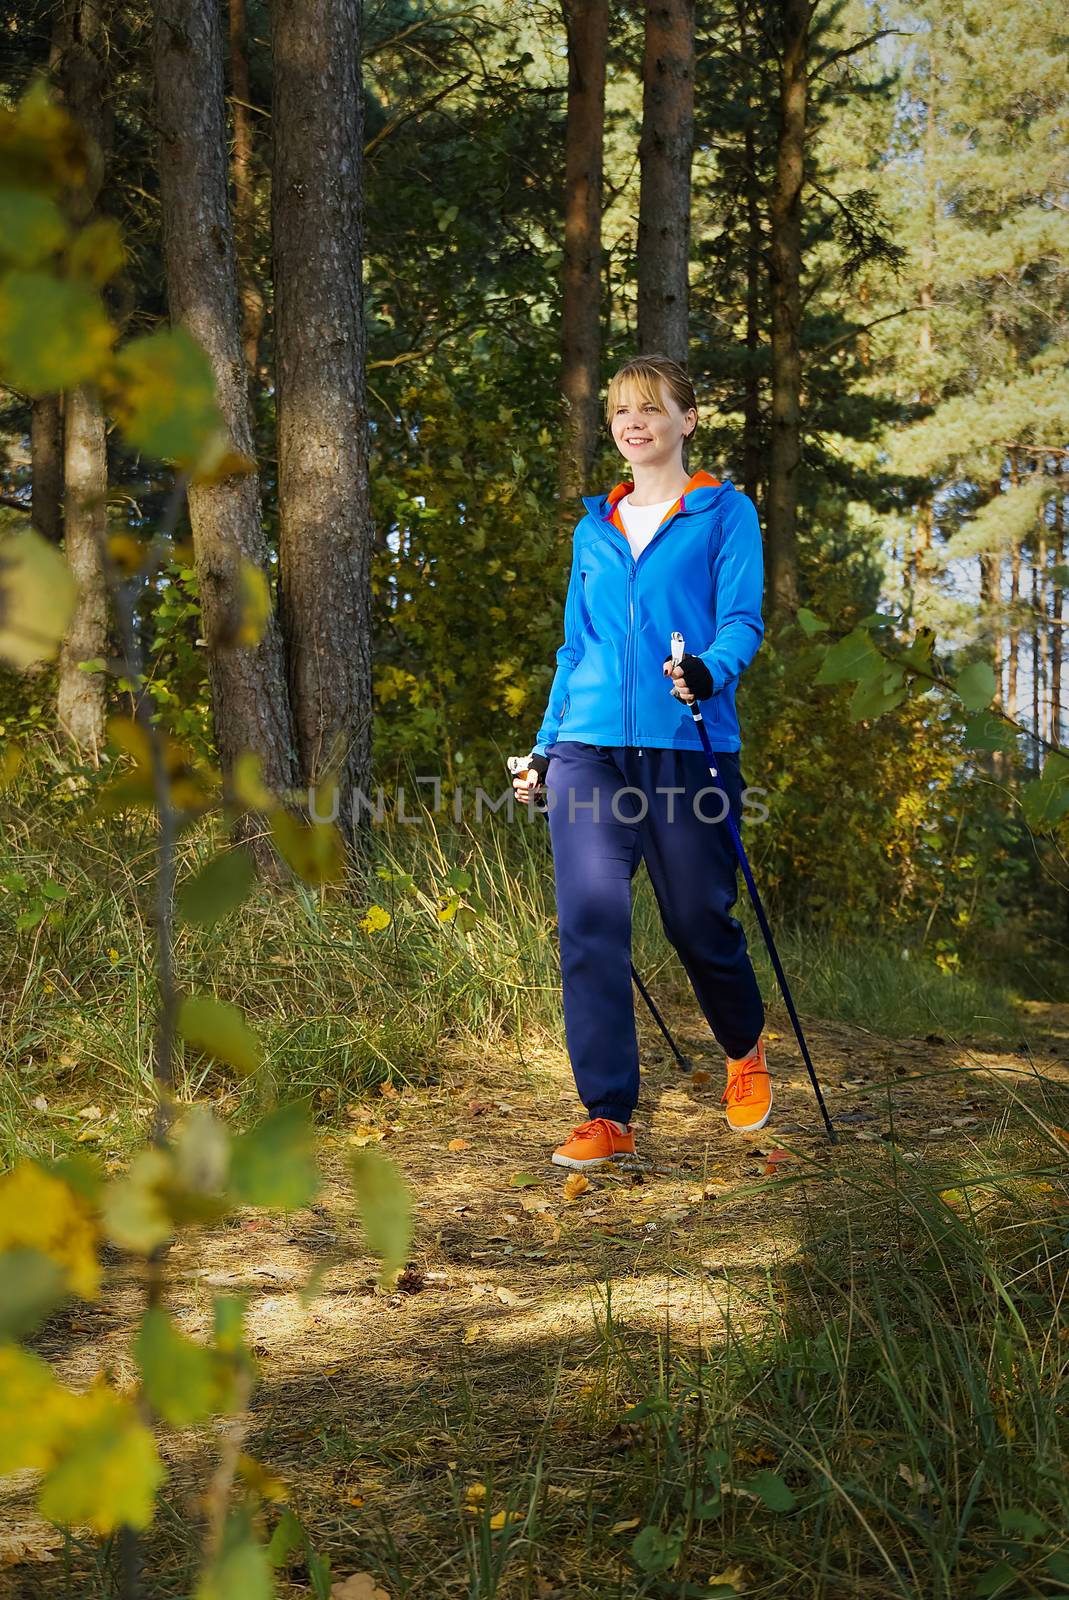 women with sticks in autumn forest making nordic walking. women hiking in autumn park with scandinavian sticks. by PhotoTime